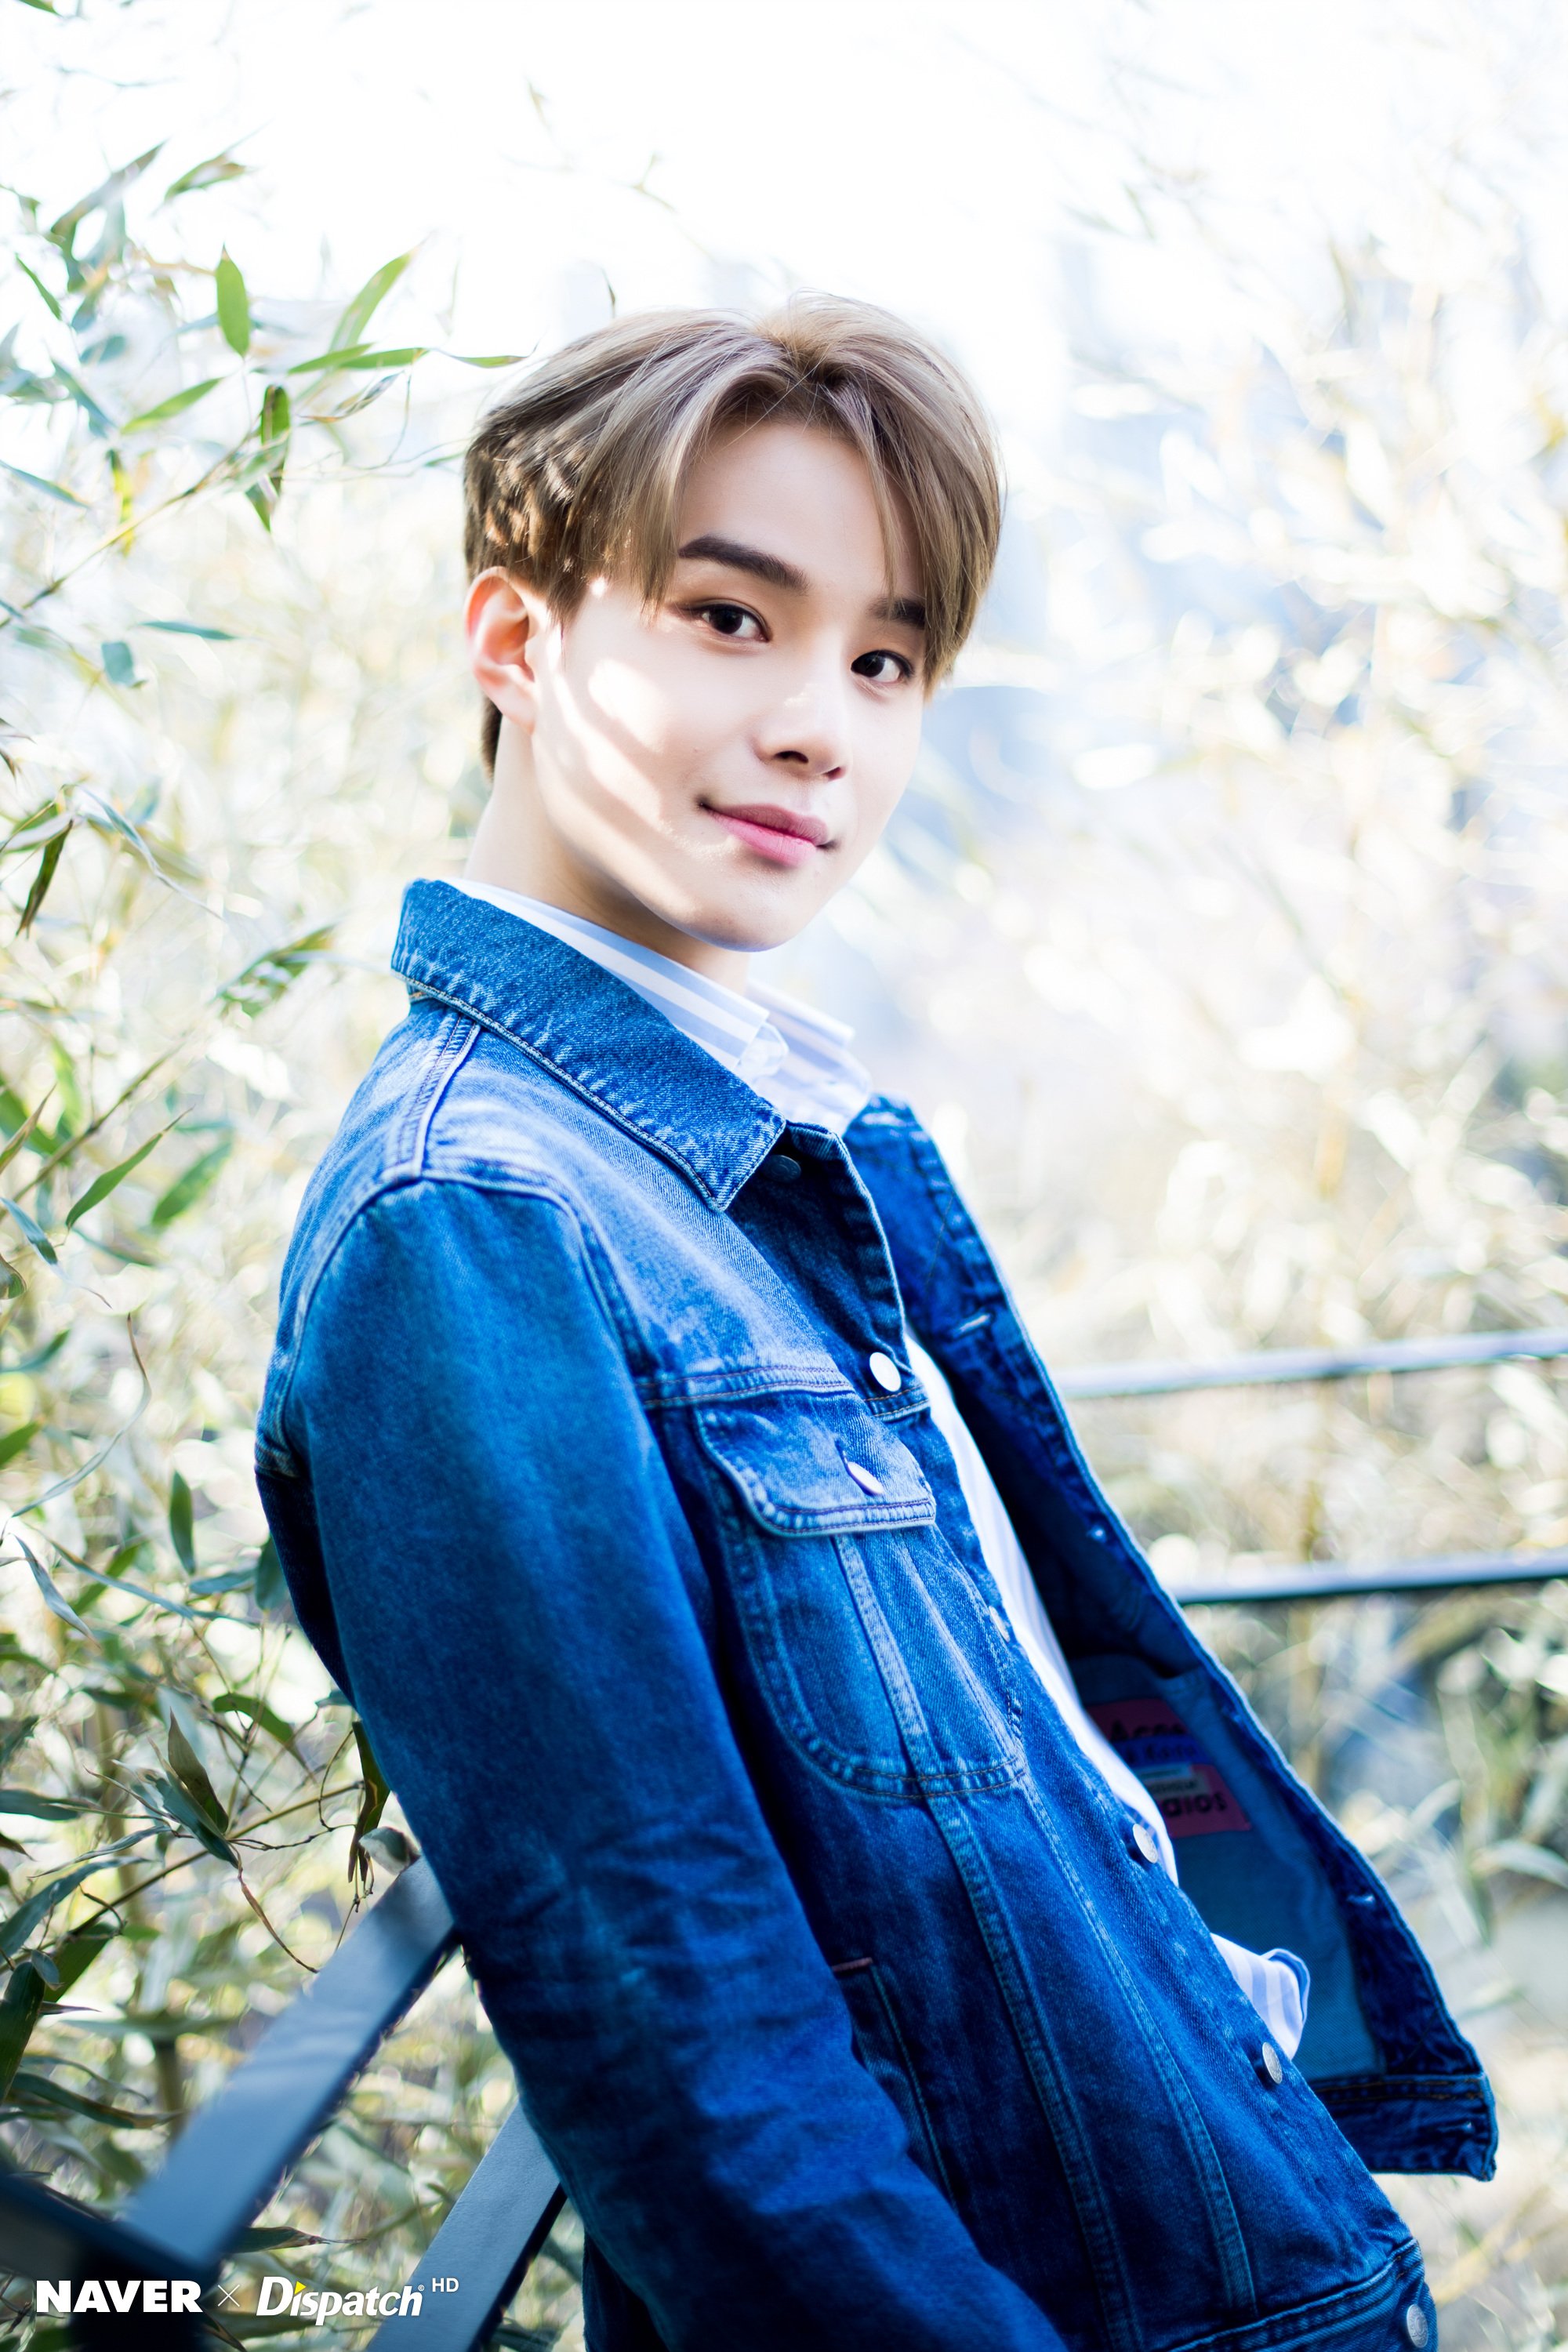 Photoshoot] [Dispatch] “NCT Sweet boy” White Day with Jungwoo